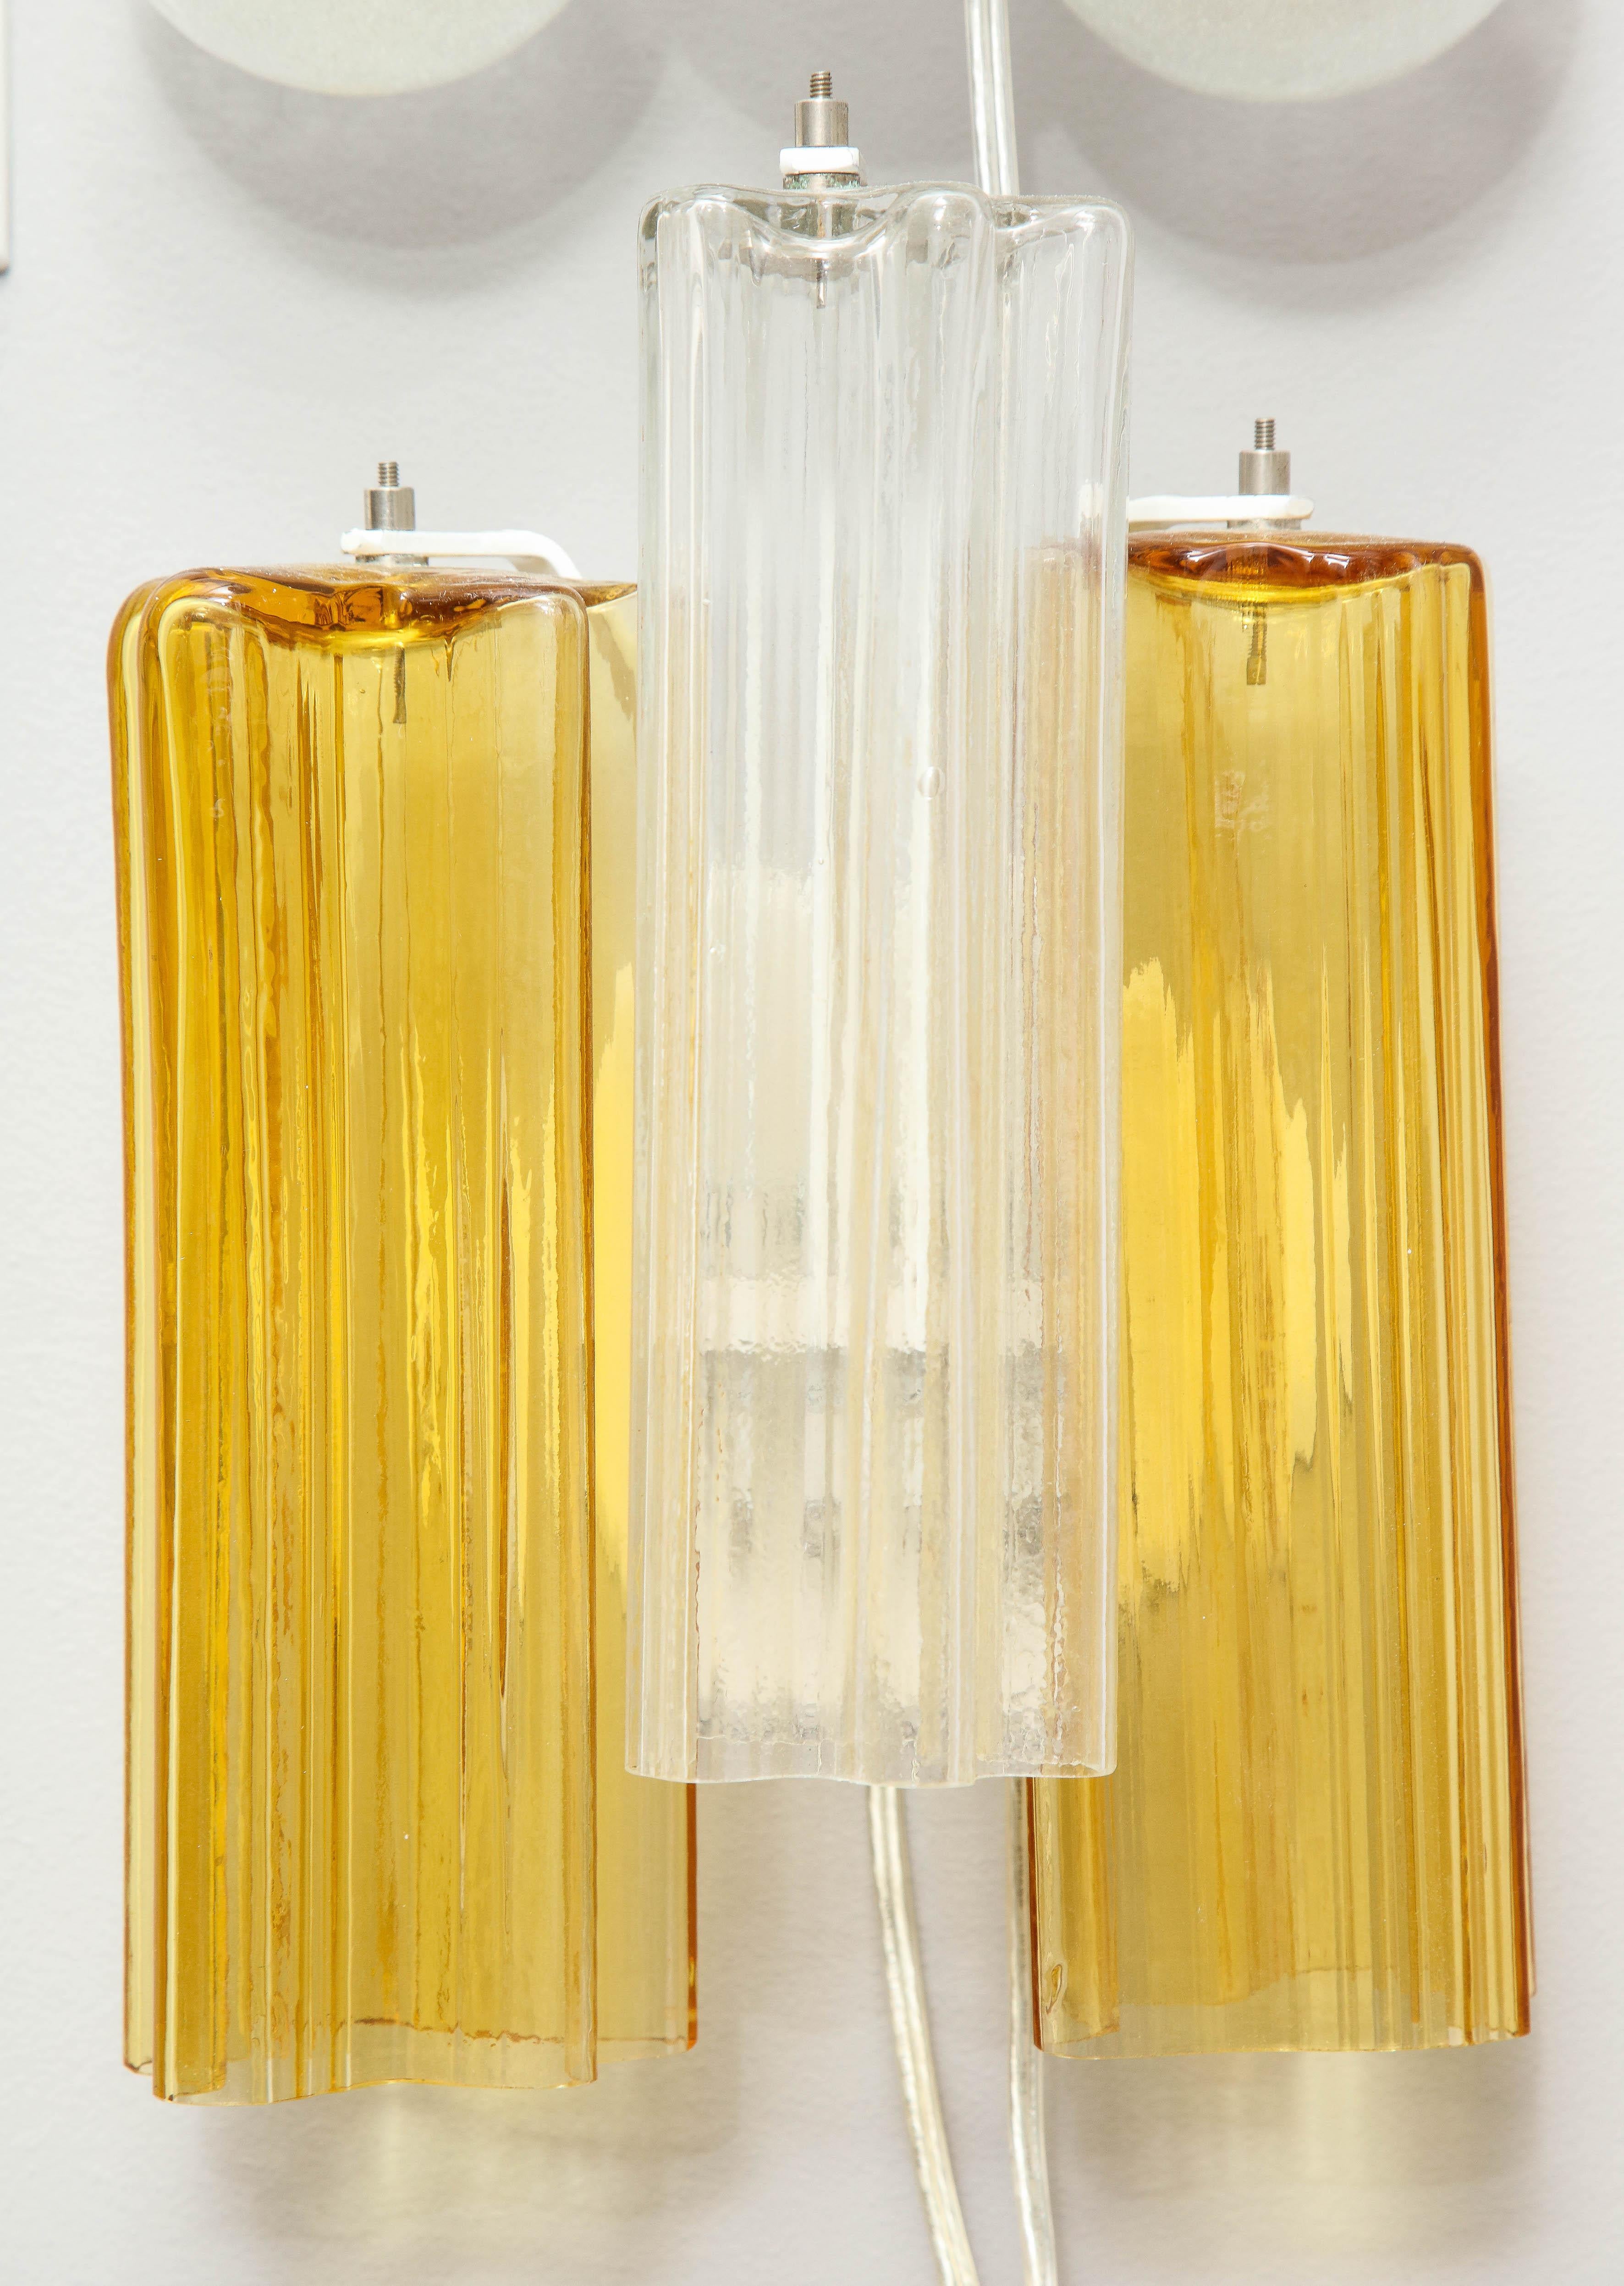 Single vintage clear and amber Venini Tronchi glass sconce. 1 light bulb socket on the sconce.